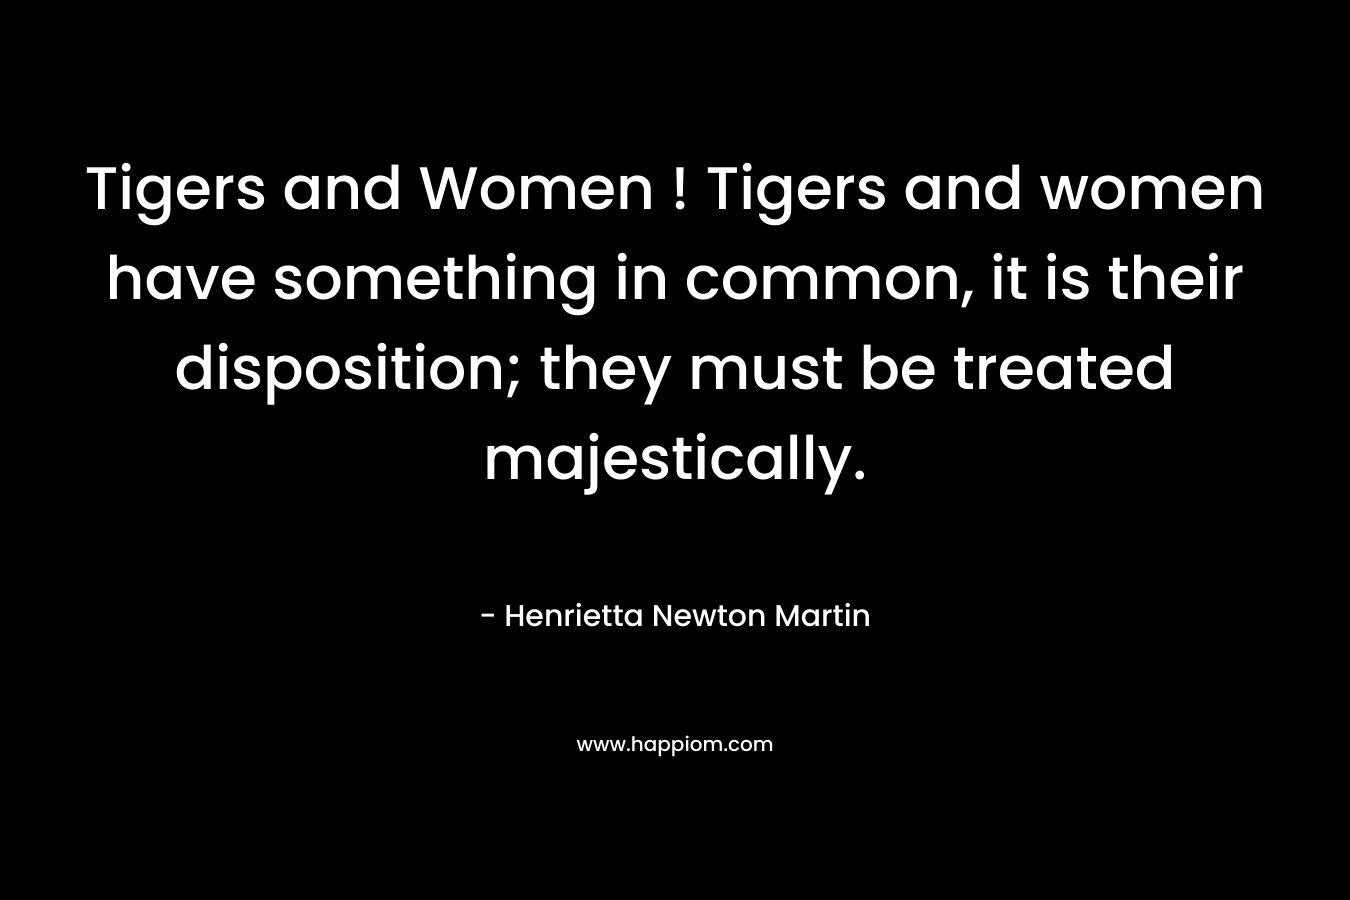 Tigers and Women ! Tigers and women have something in common, it is their disposition; they must be treated majestically.